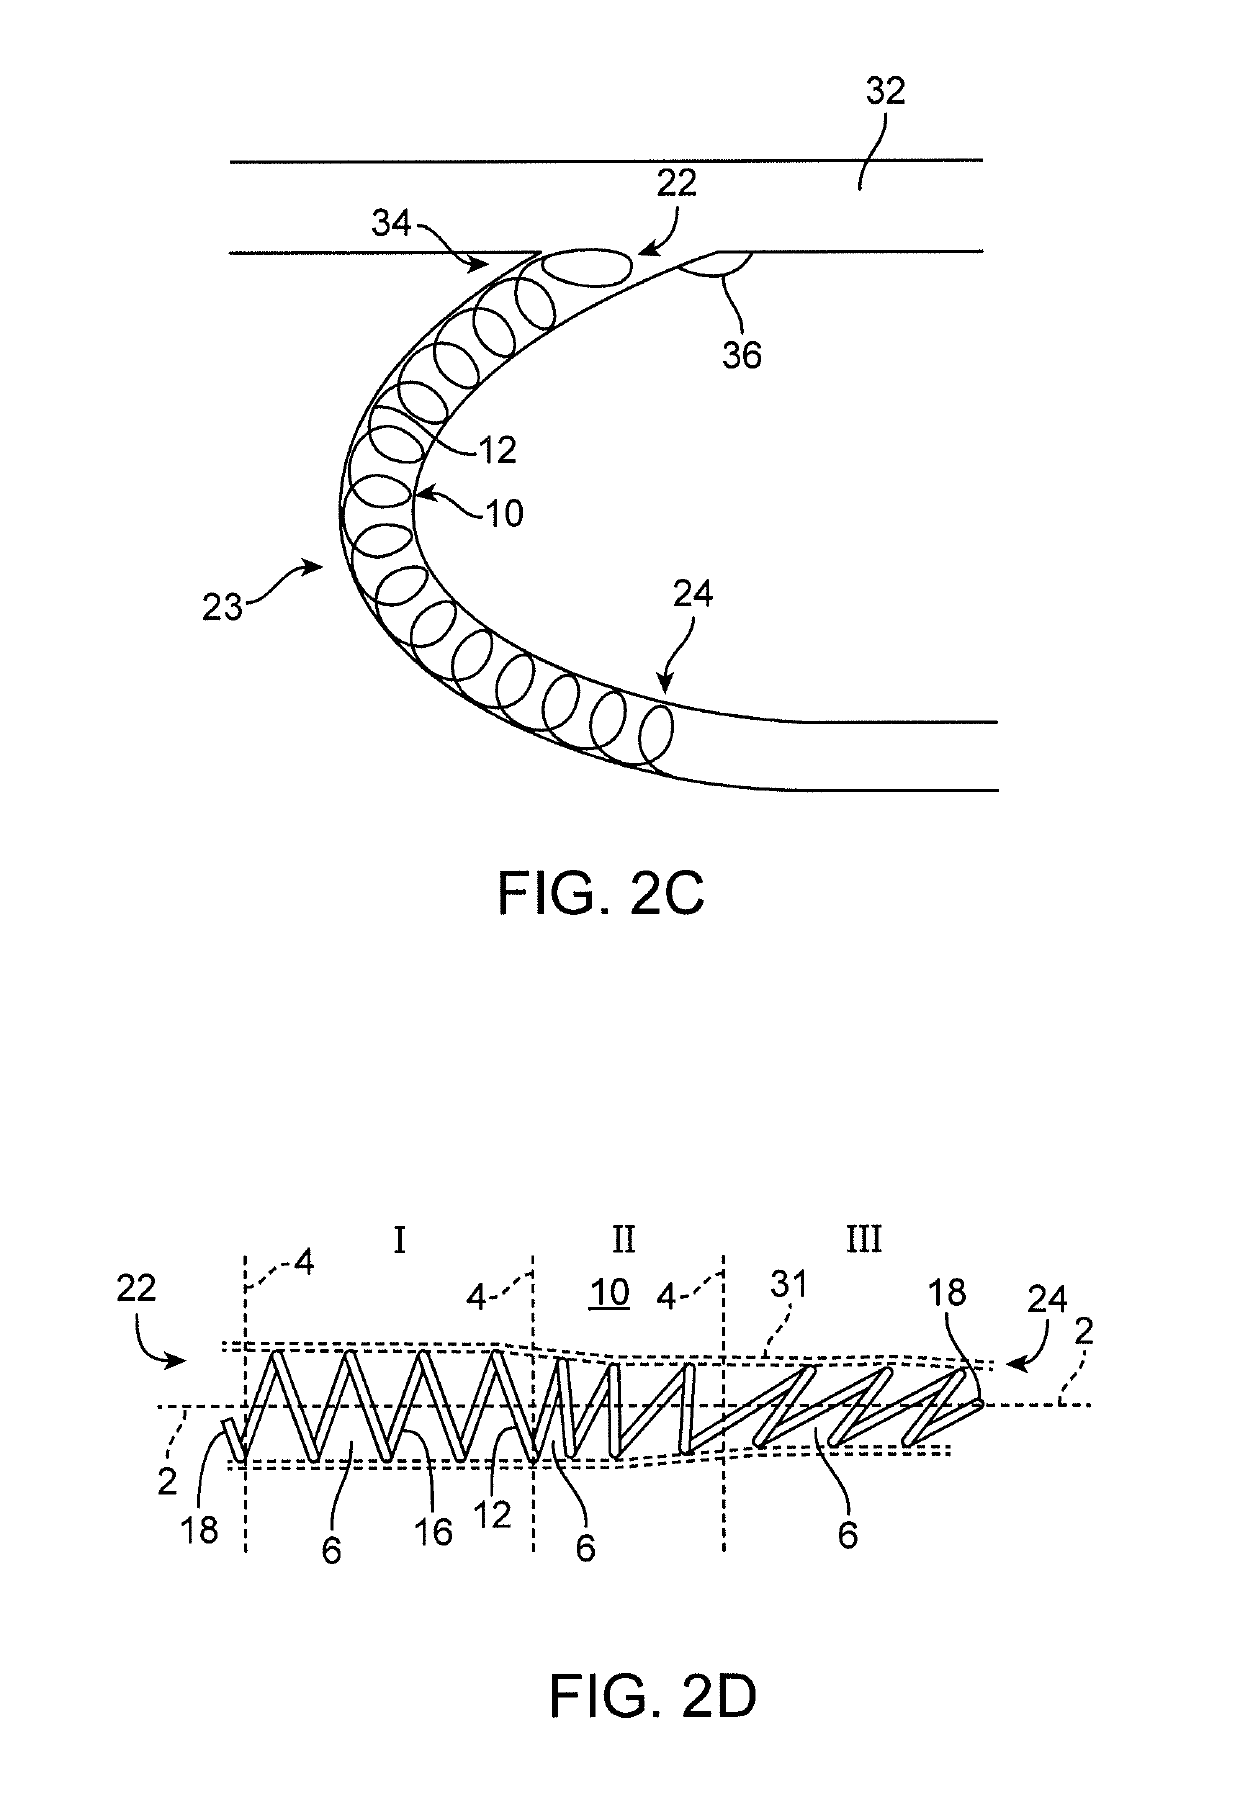 Platform device and method of use to assist in anastomosis formation